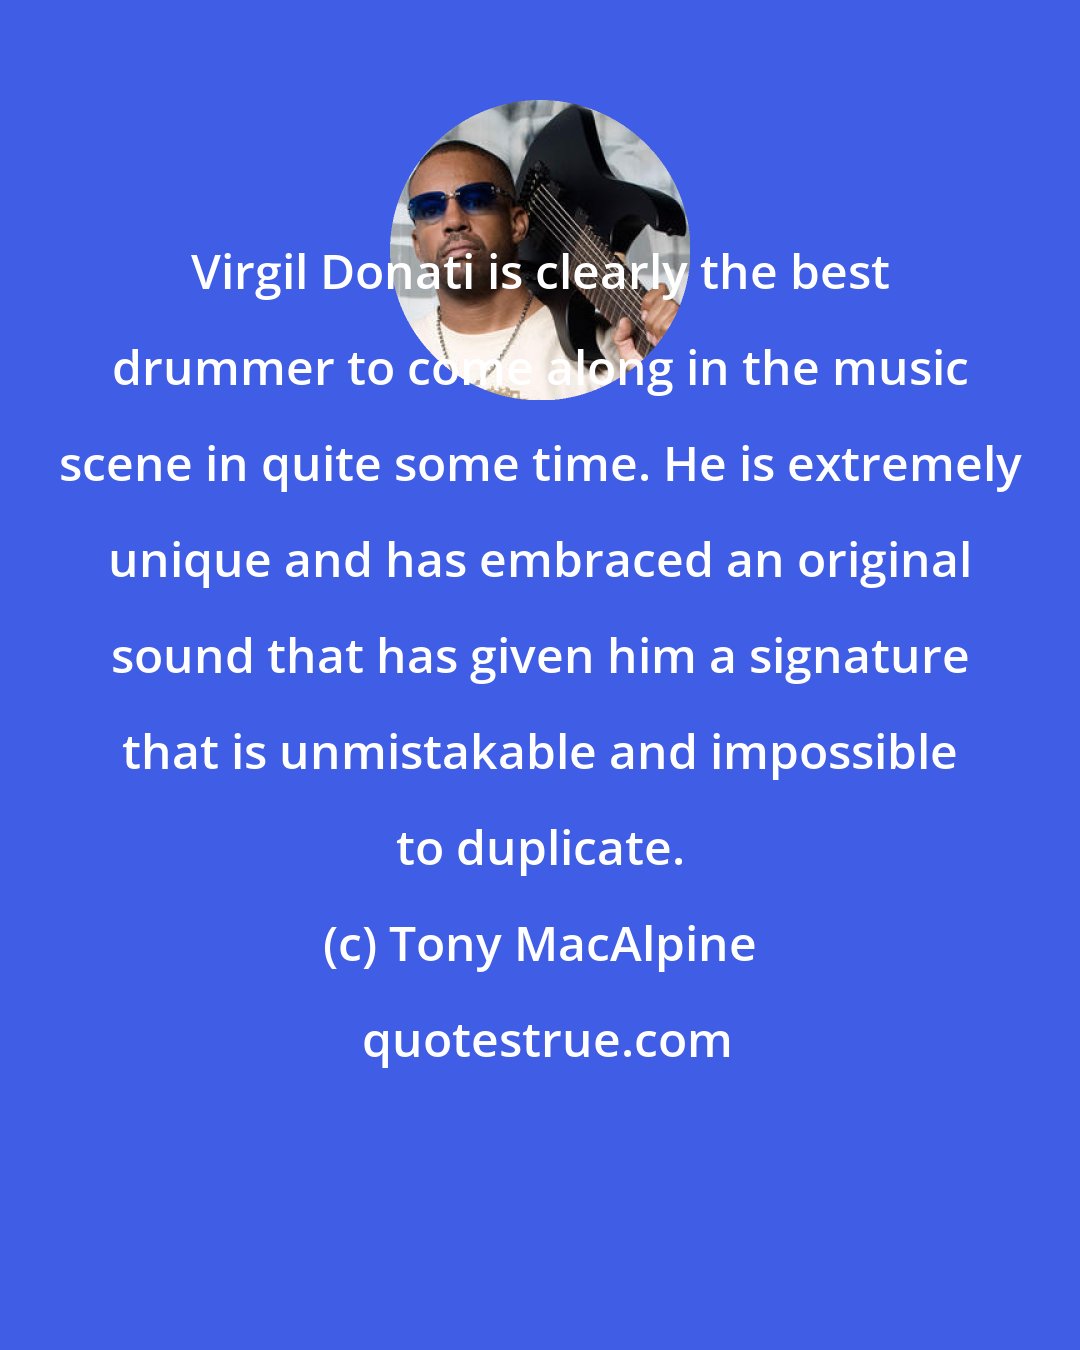 Tony MacAlpine: Virgil Donati is clearly the best drummer to come along in the music scene in quite some time. He is extremely unique and has embraced an original sound that has given him a signature that is unmistakable and impossible to duplicate.